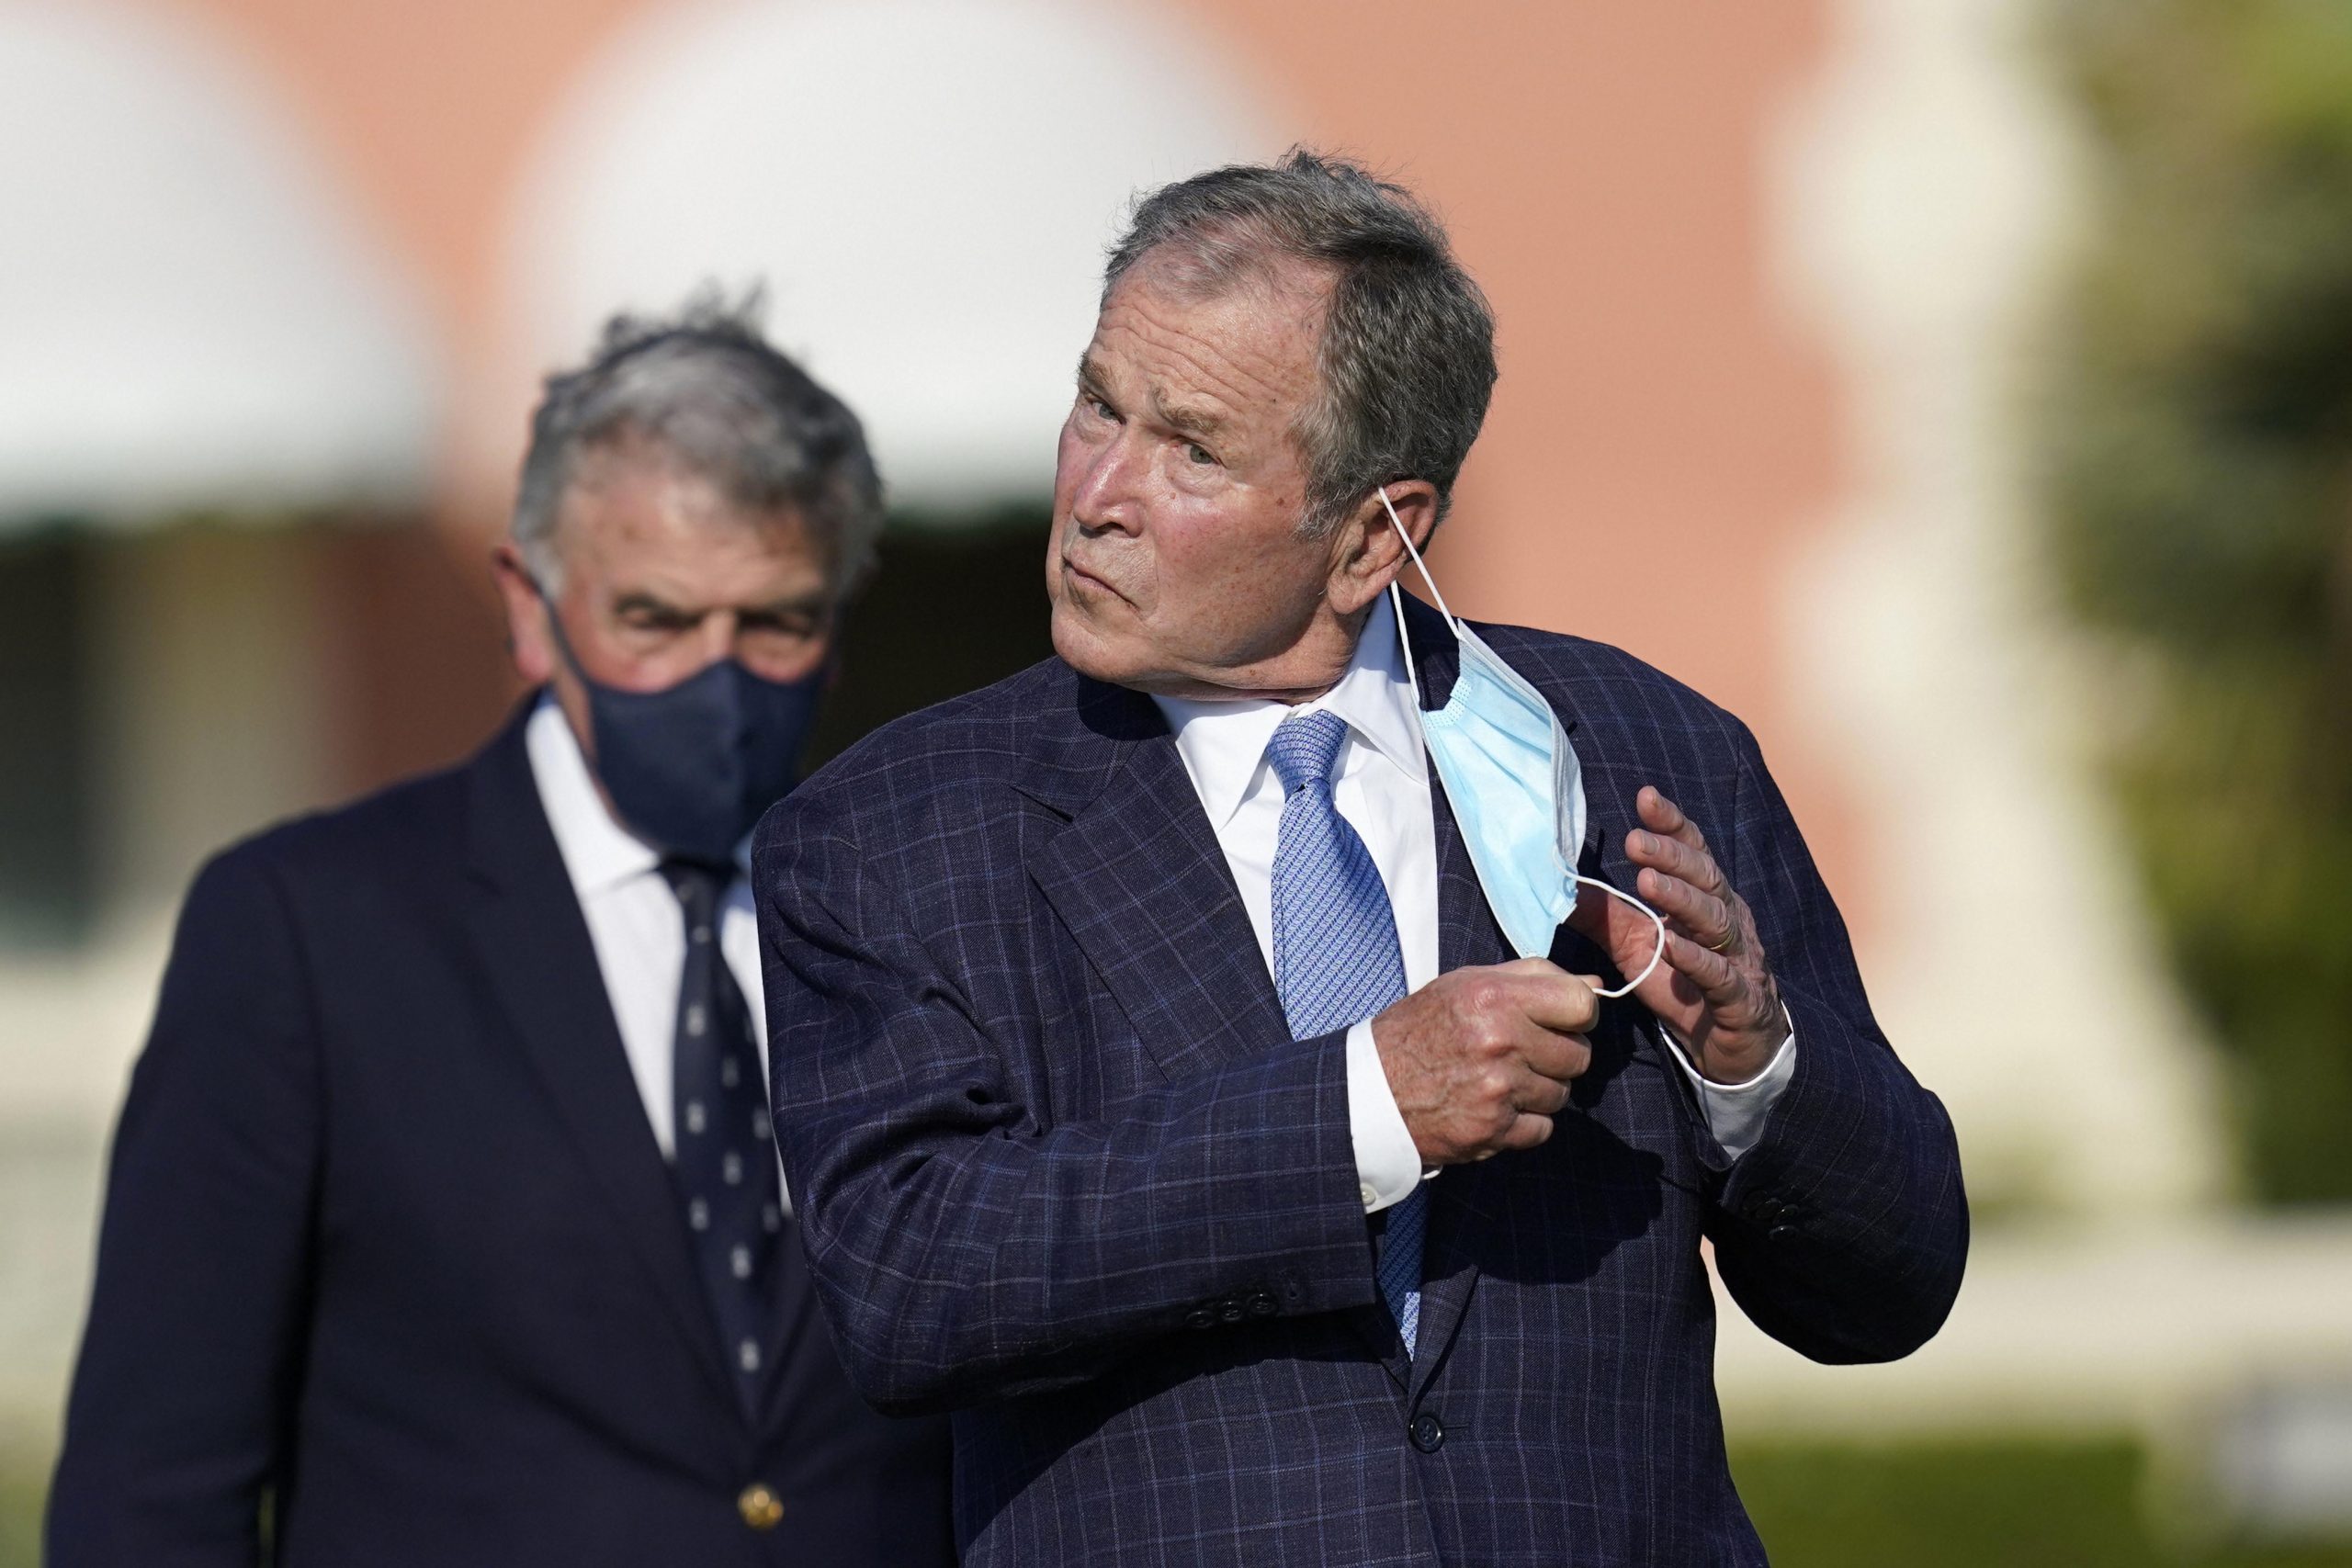 Proud of our wounded nation: George W Bush rues divisive America on 9/11